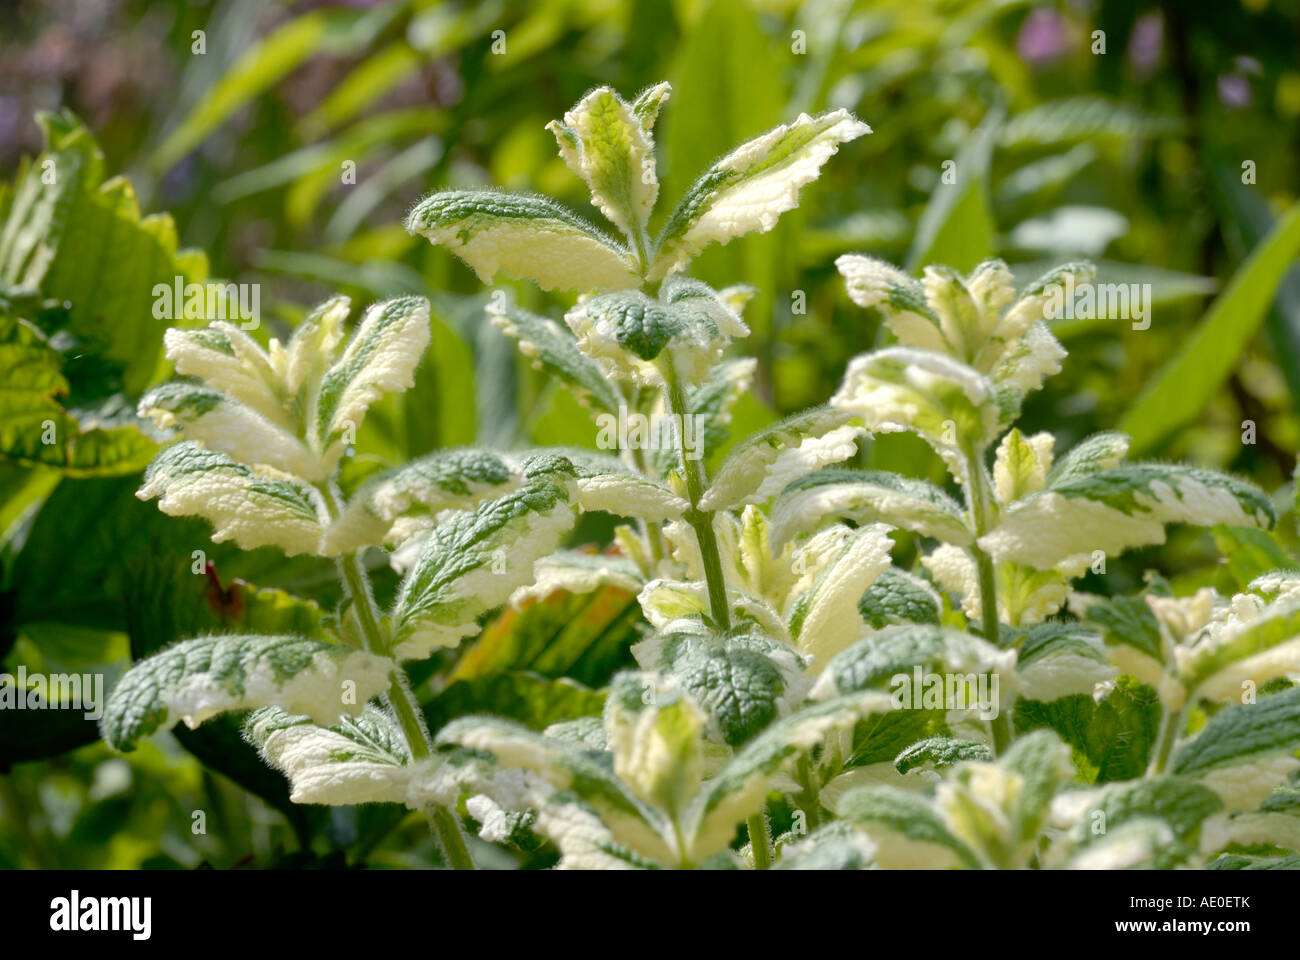 Pineapple Mint leaves, Mentha sp Stock Photo